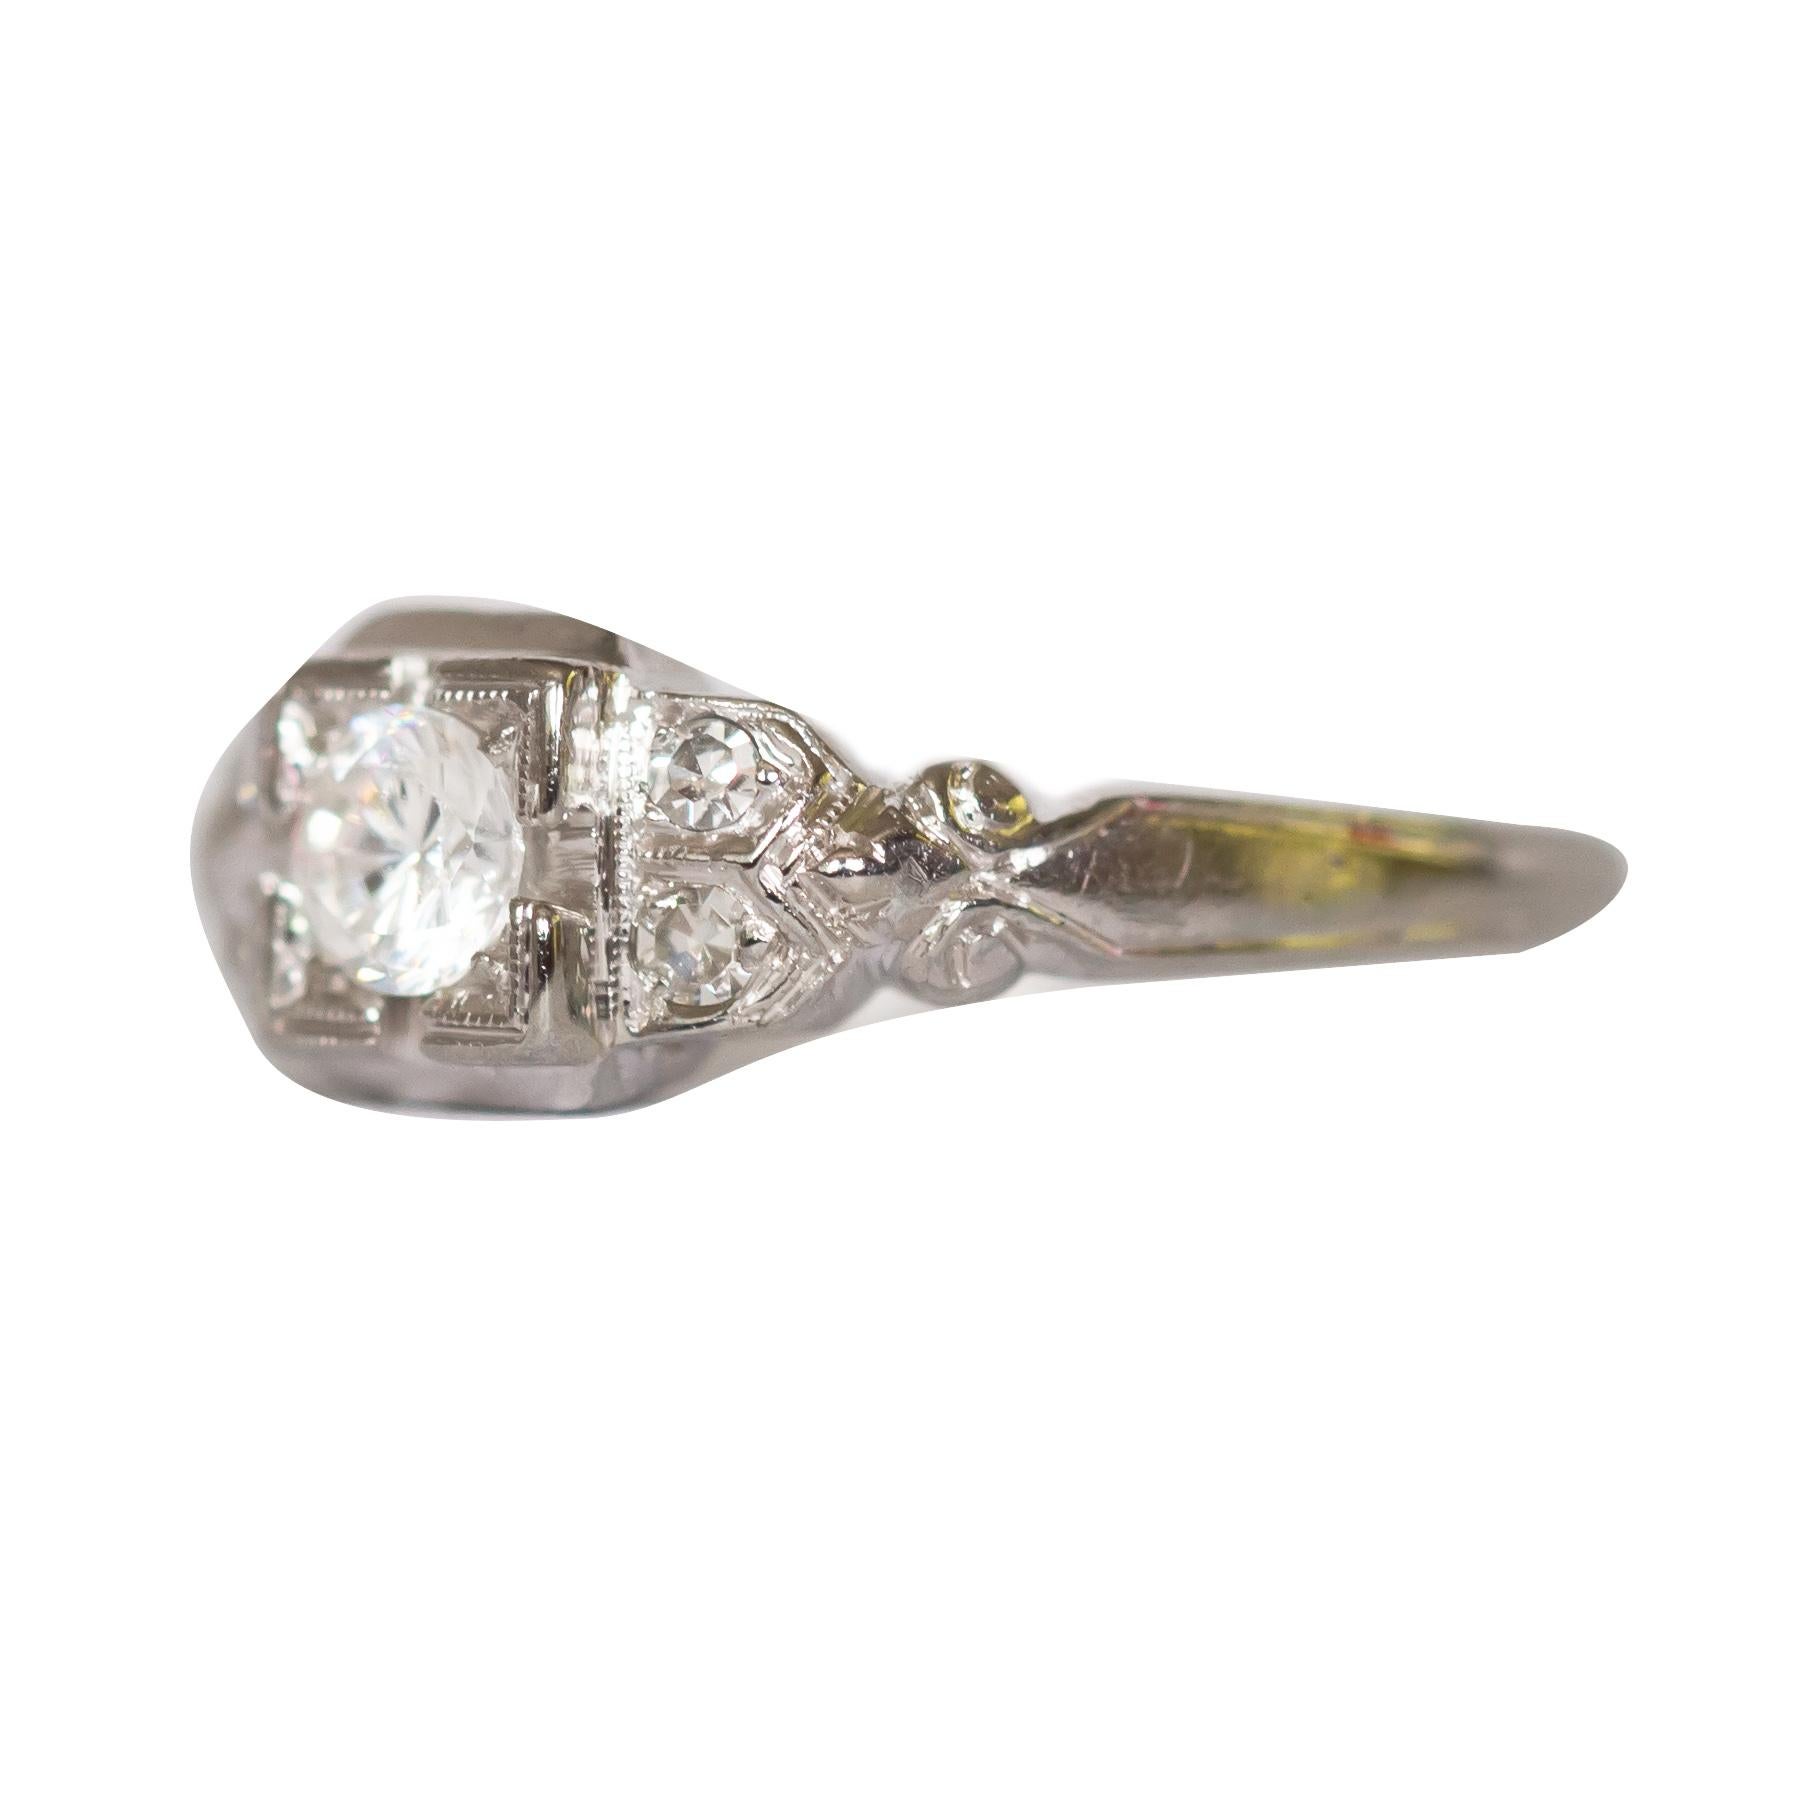 Ring Size: 6.5
Metal Type:  18 karat White Gold [Hallmarked, and Tested]
Weight: 2.5  grams

Center Diamond Details:
Weight: .42 carat
Cut: Old European Brilliant
Color: G
Clarity: SI1

Side Diamond Details:
Weight: .08 carat, total weight
Cut: Old